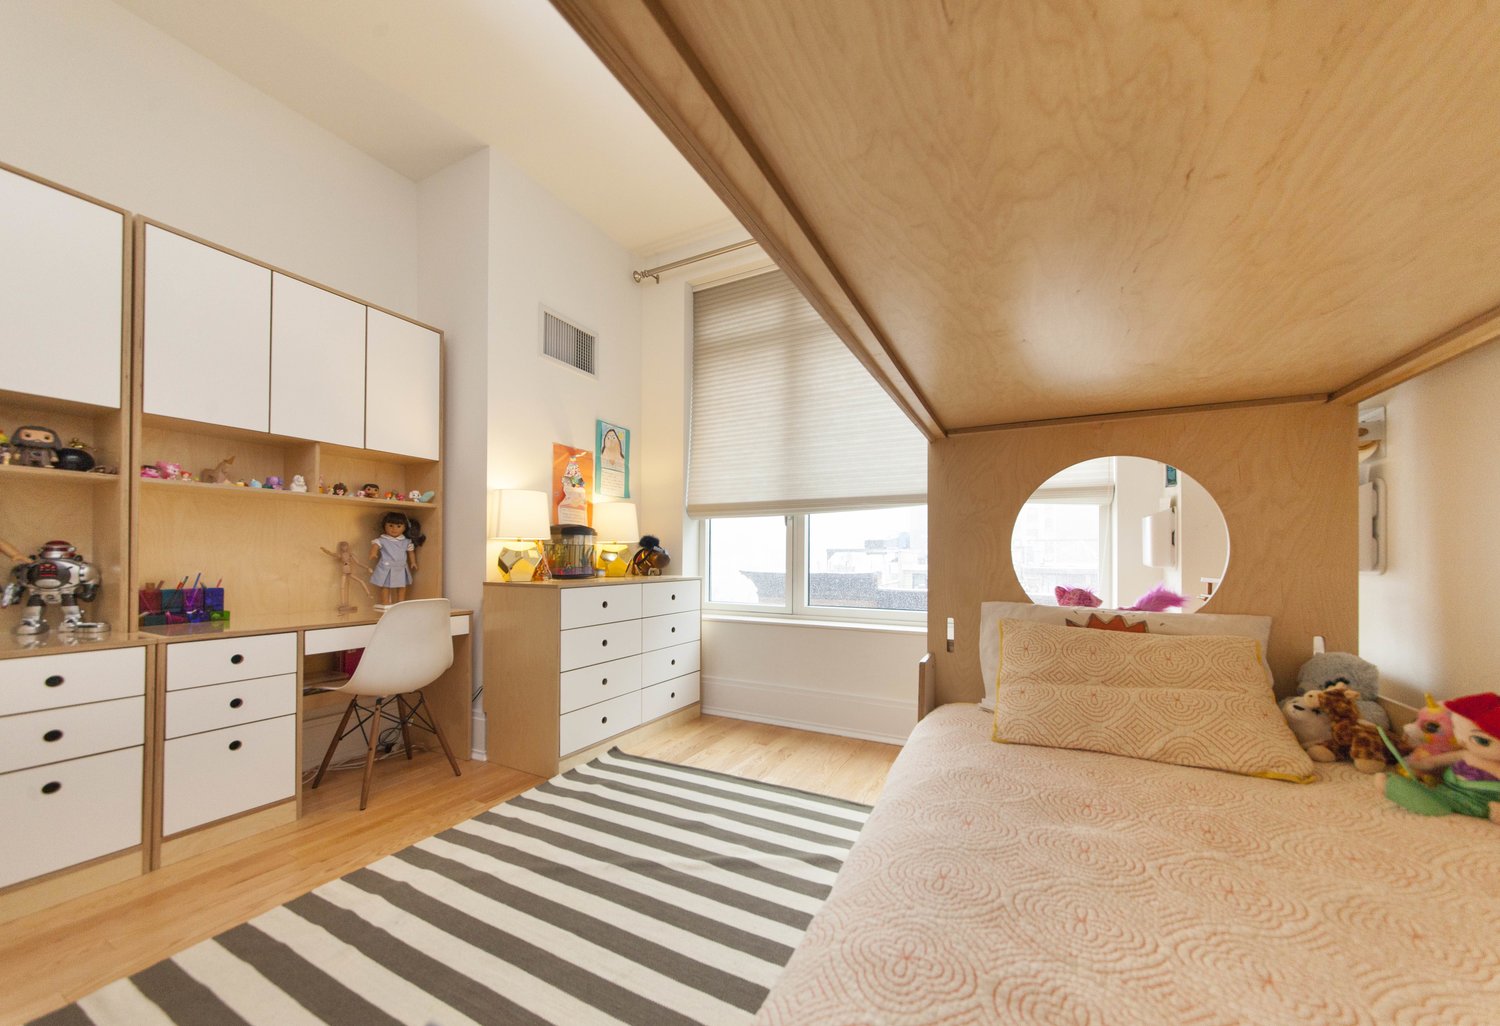 Bright child's room with modern furniture, a striped rug, and a unique window design.